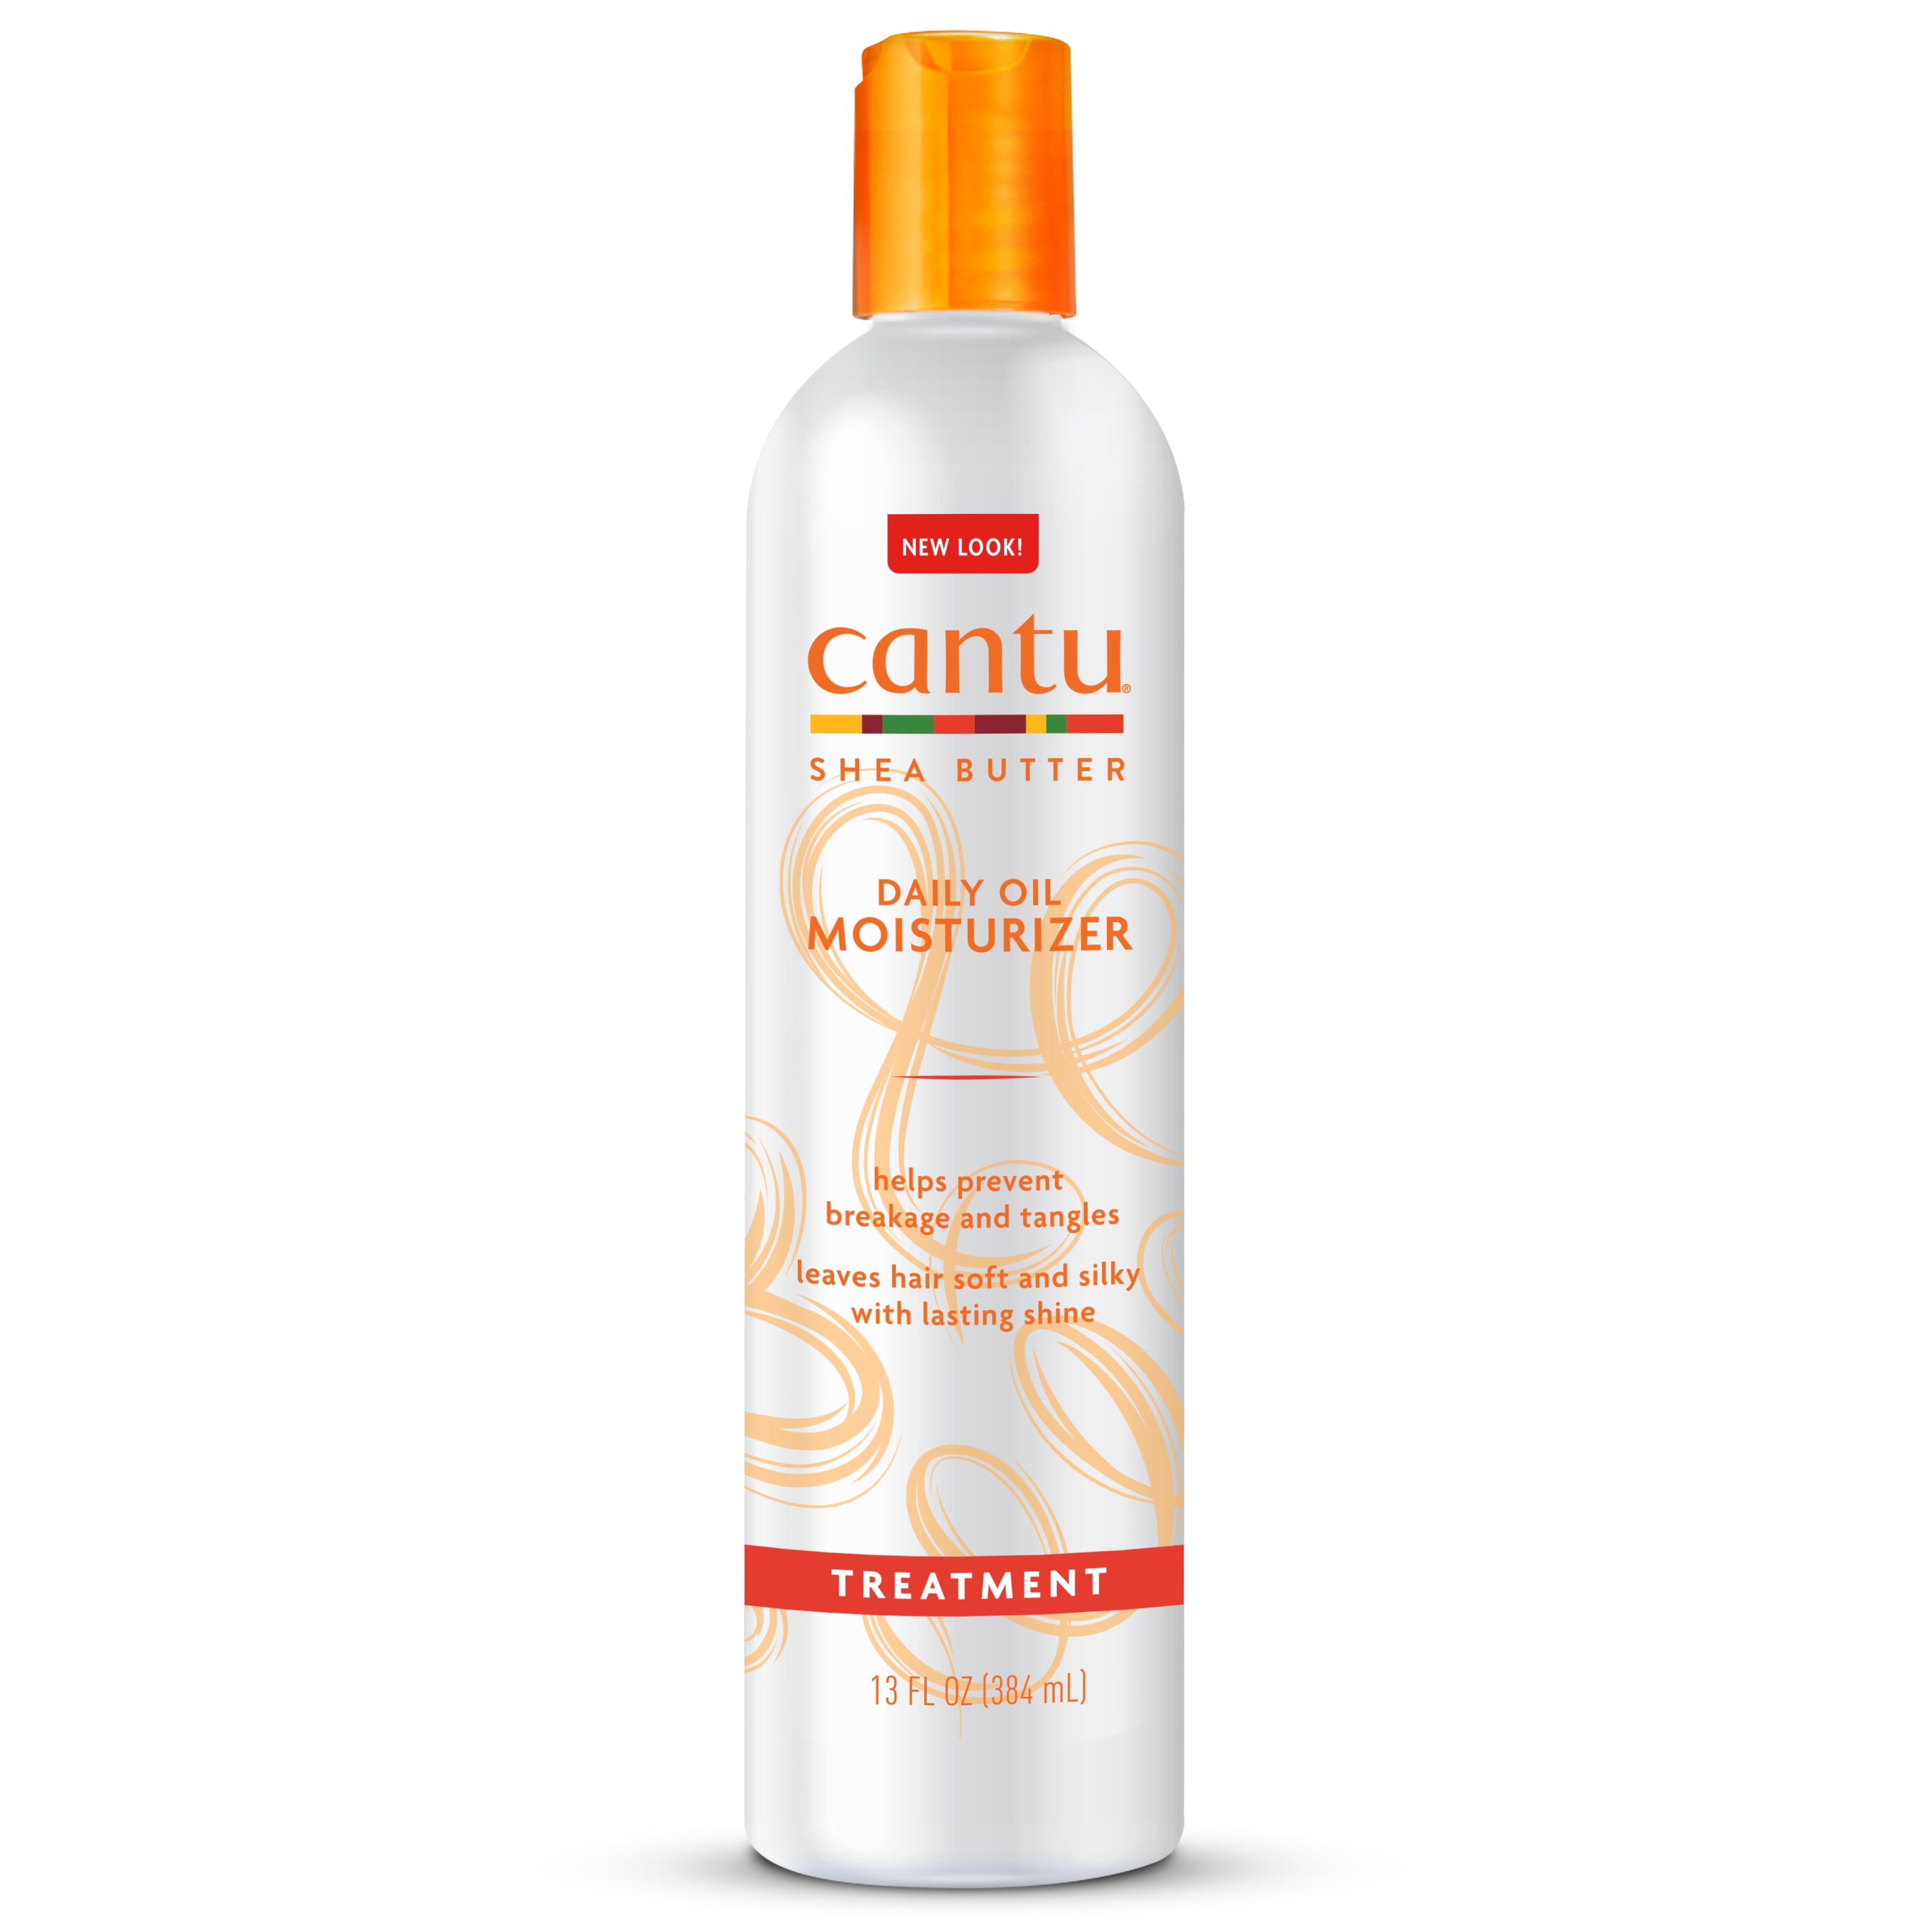 Cantu Shea Butter Daily Oil Moisturizer, Softens & Protects, 13 fl oz